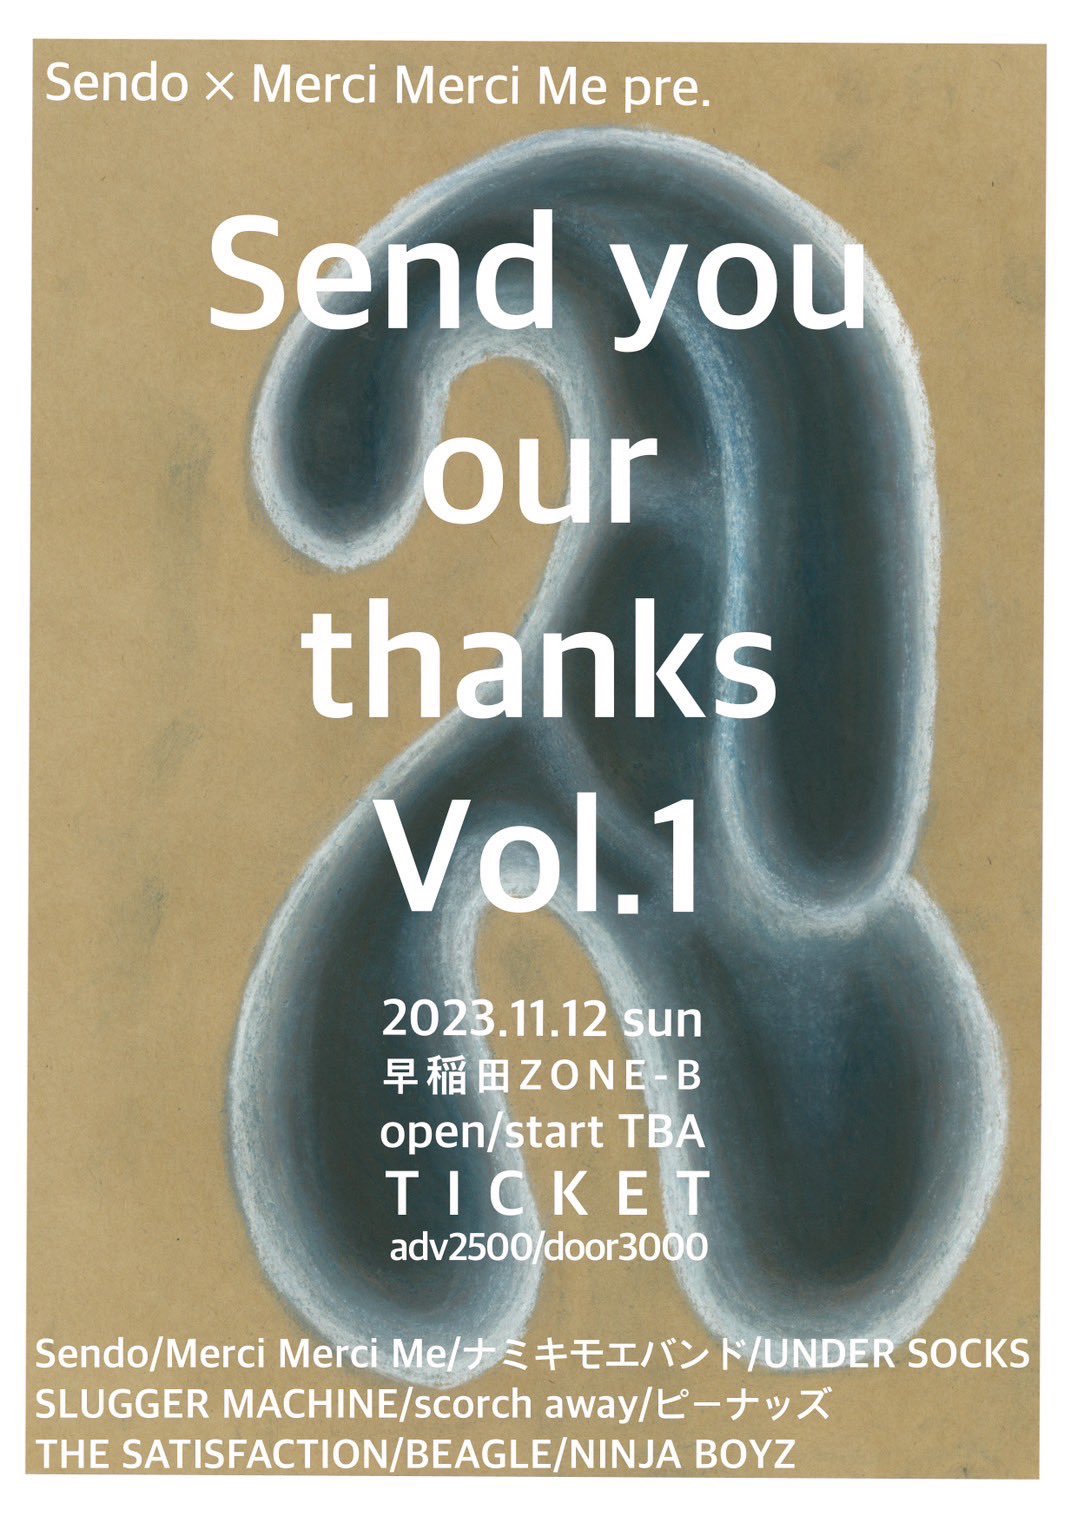 Send you our thanks vol.1